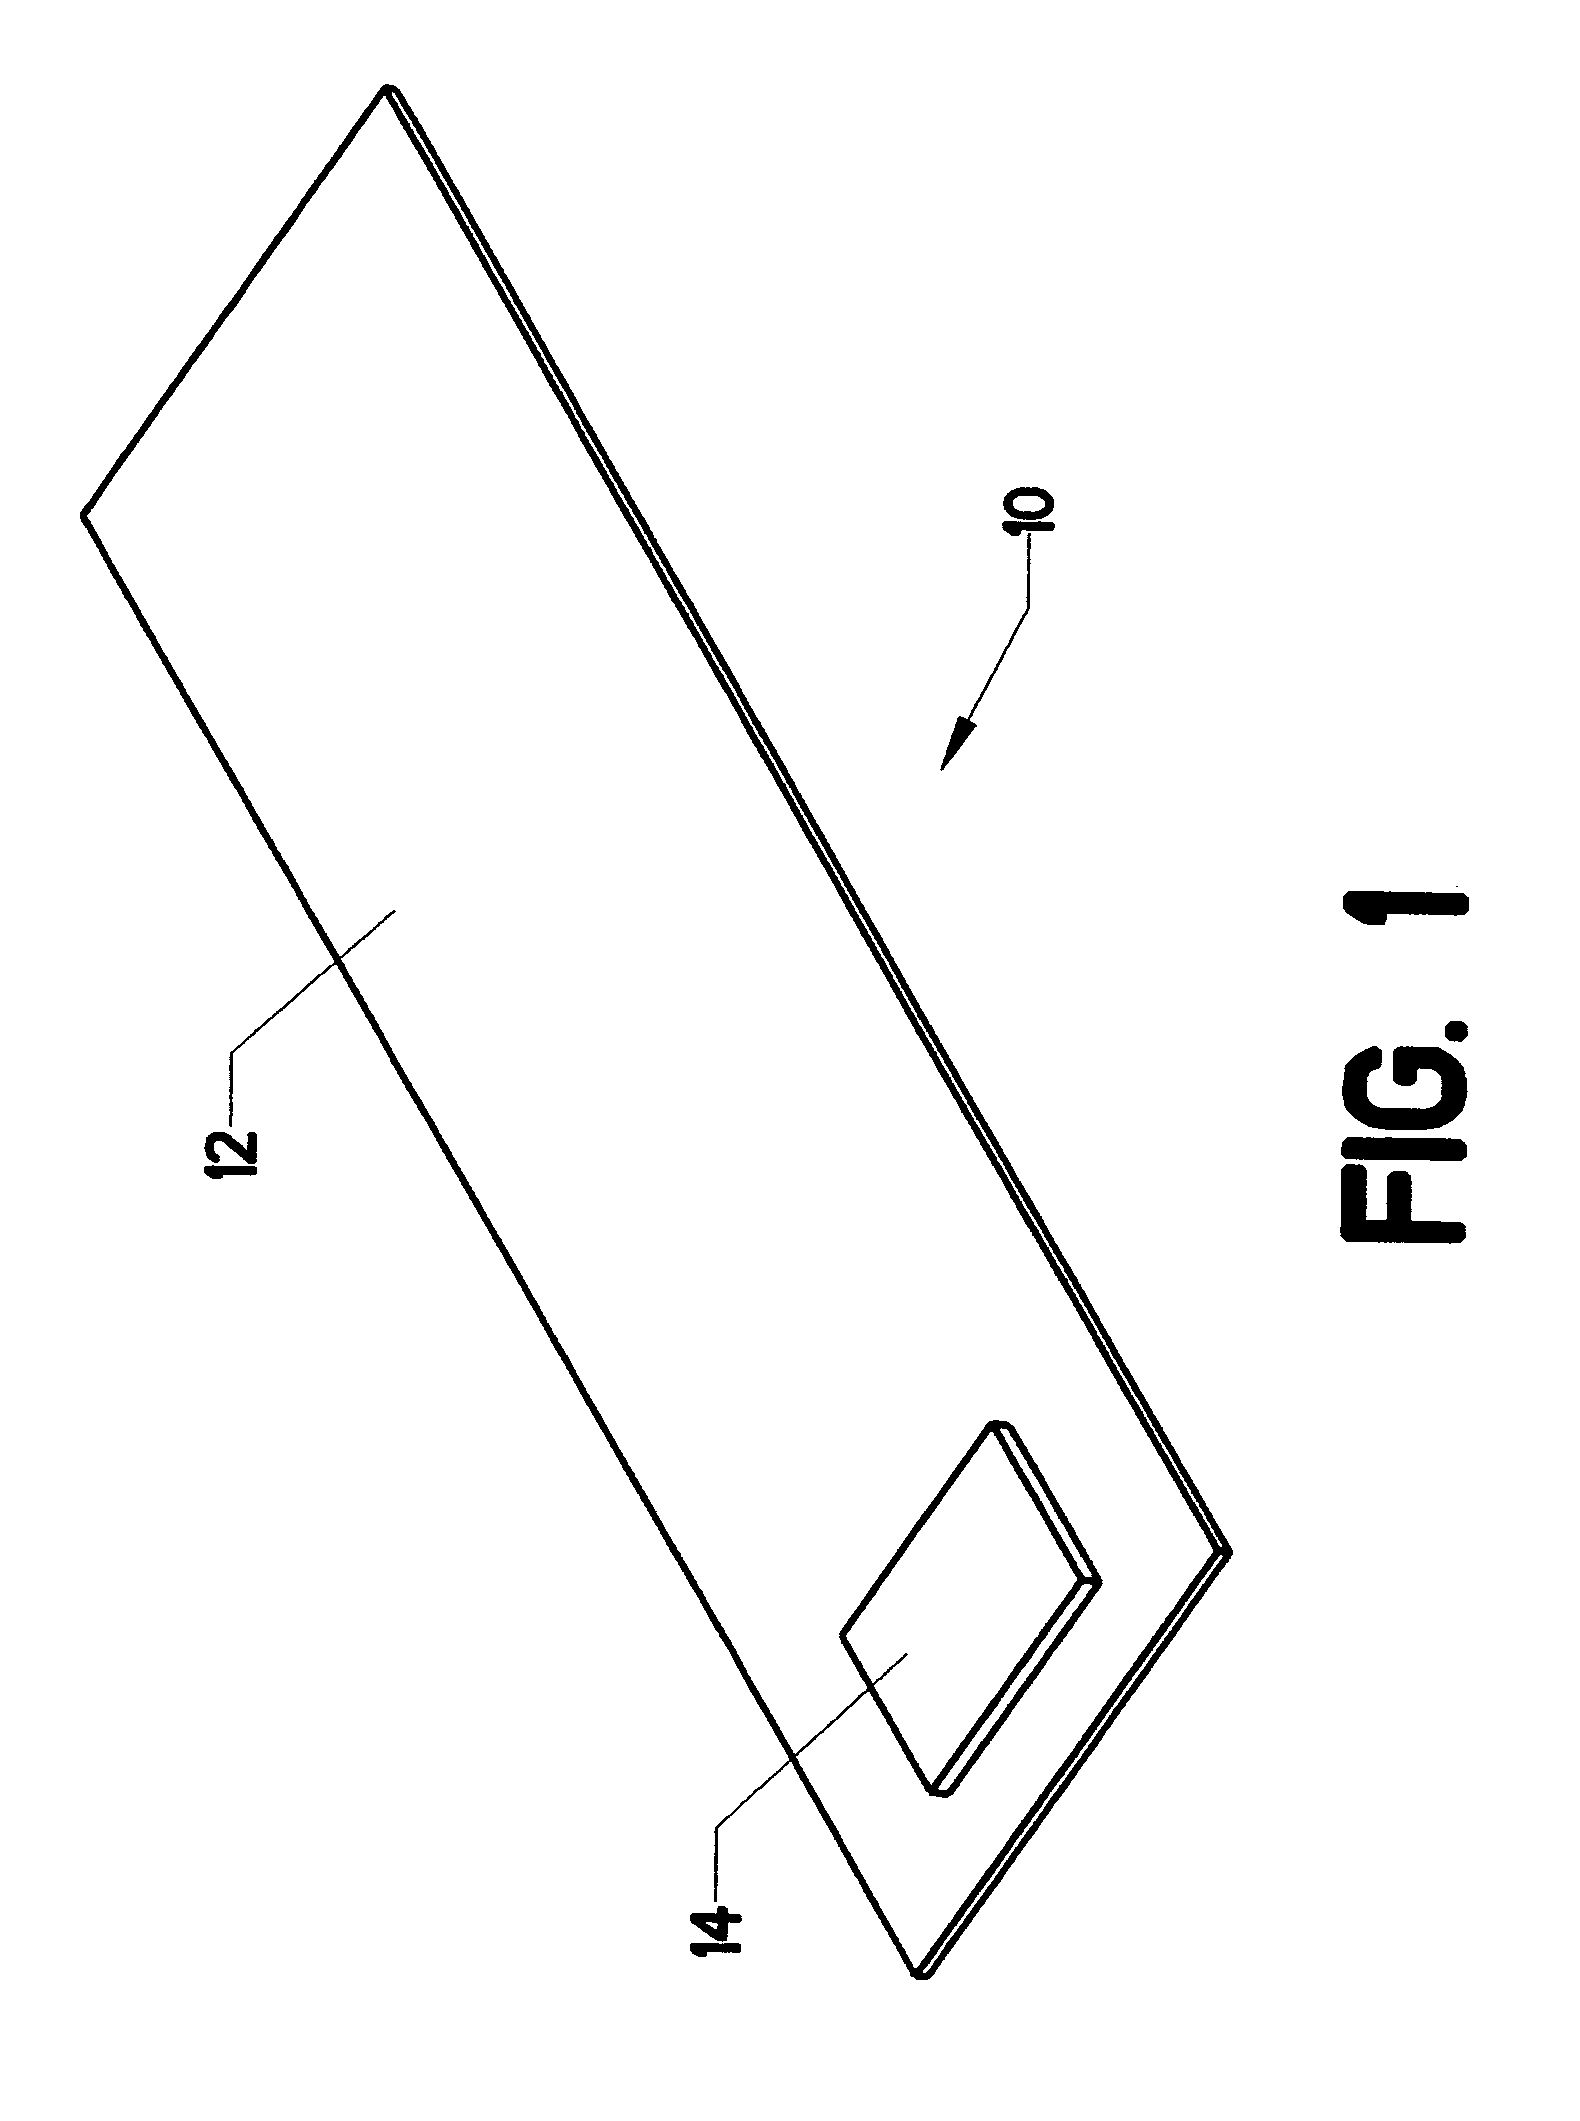 Method and apparatus for securing a tee shirt to a bra